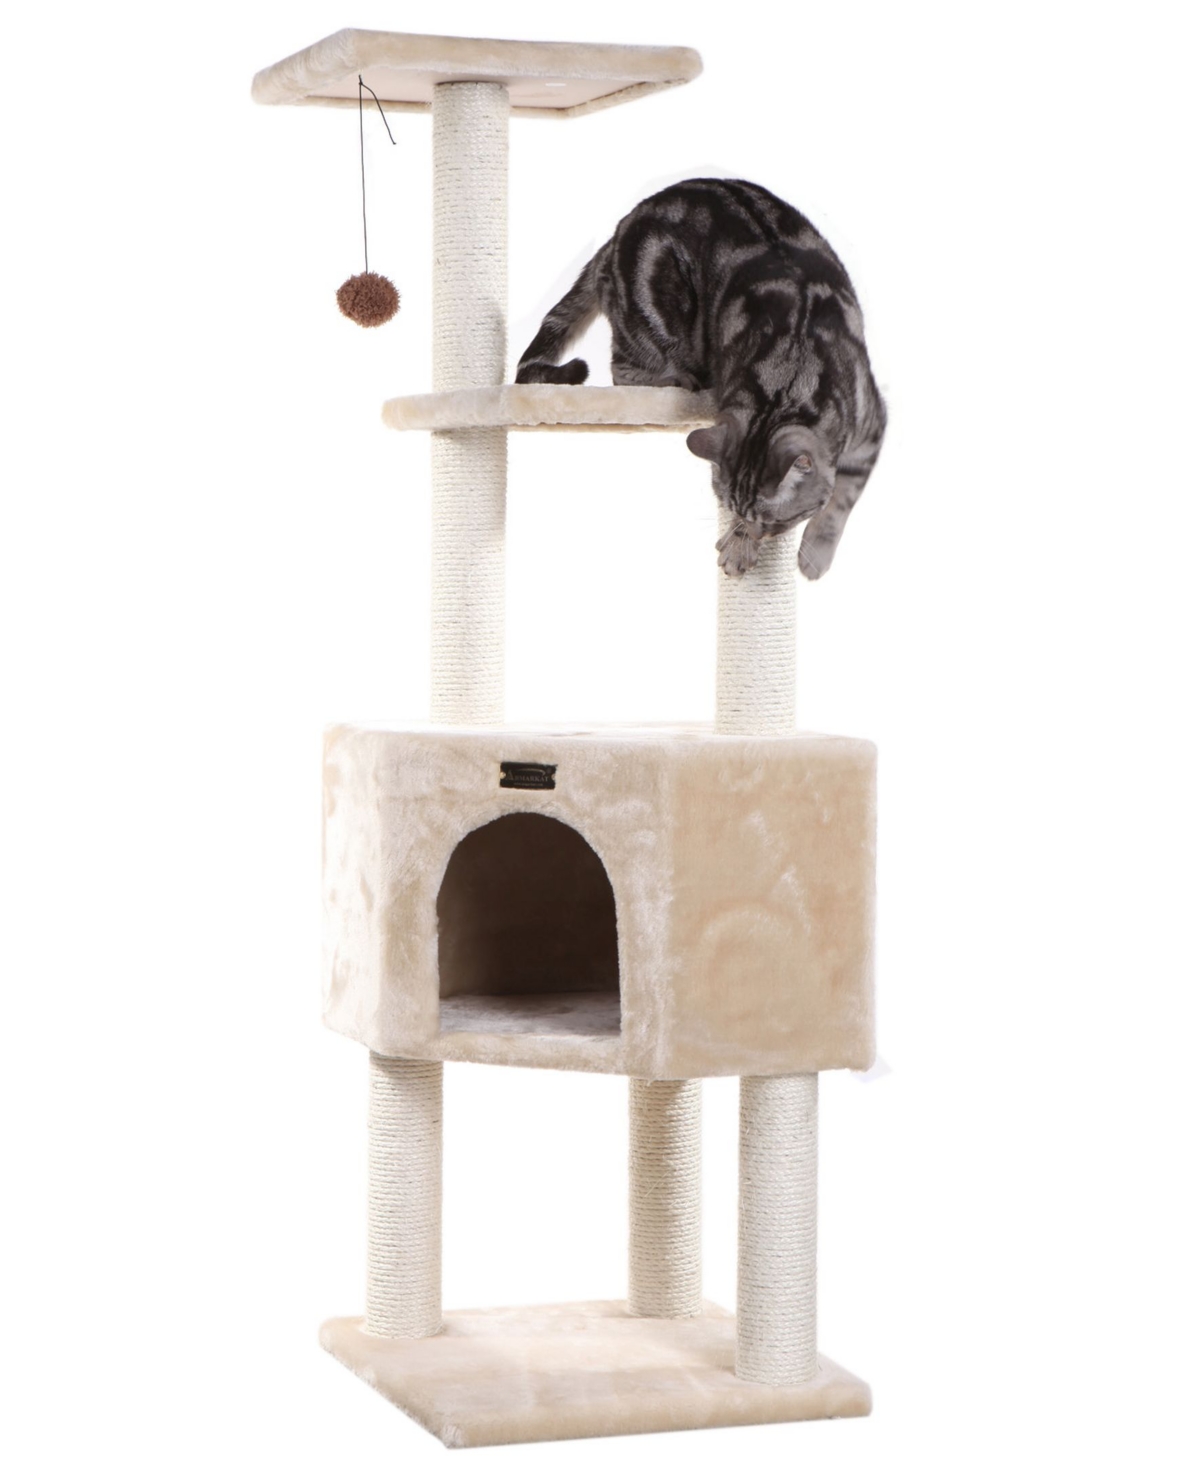 48" Real Wood 3-Level Cat Tower for Kittens Play - Beige